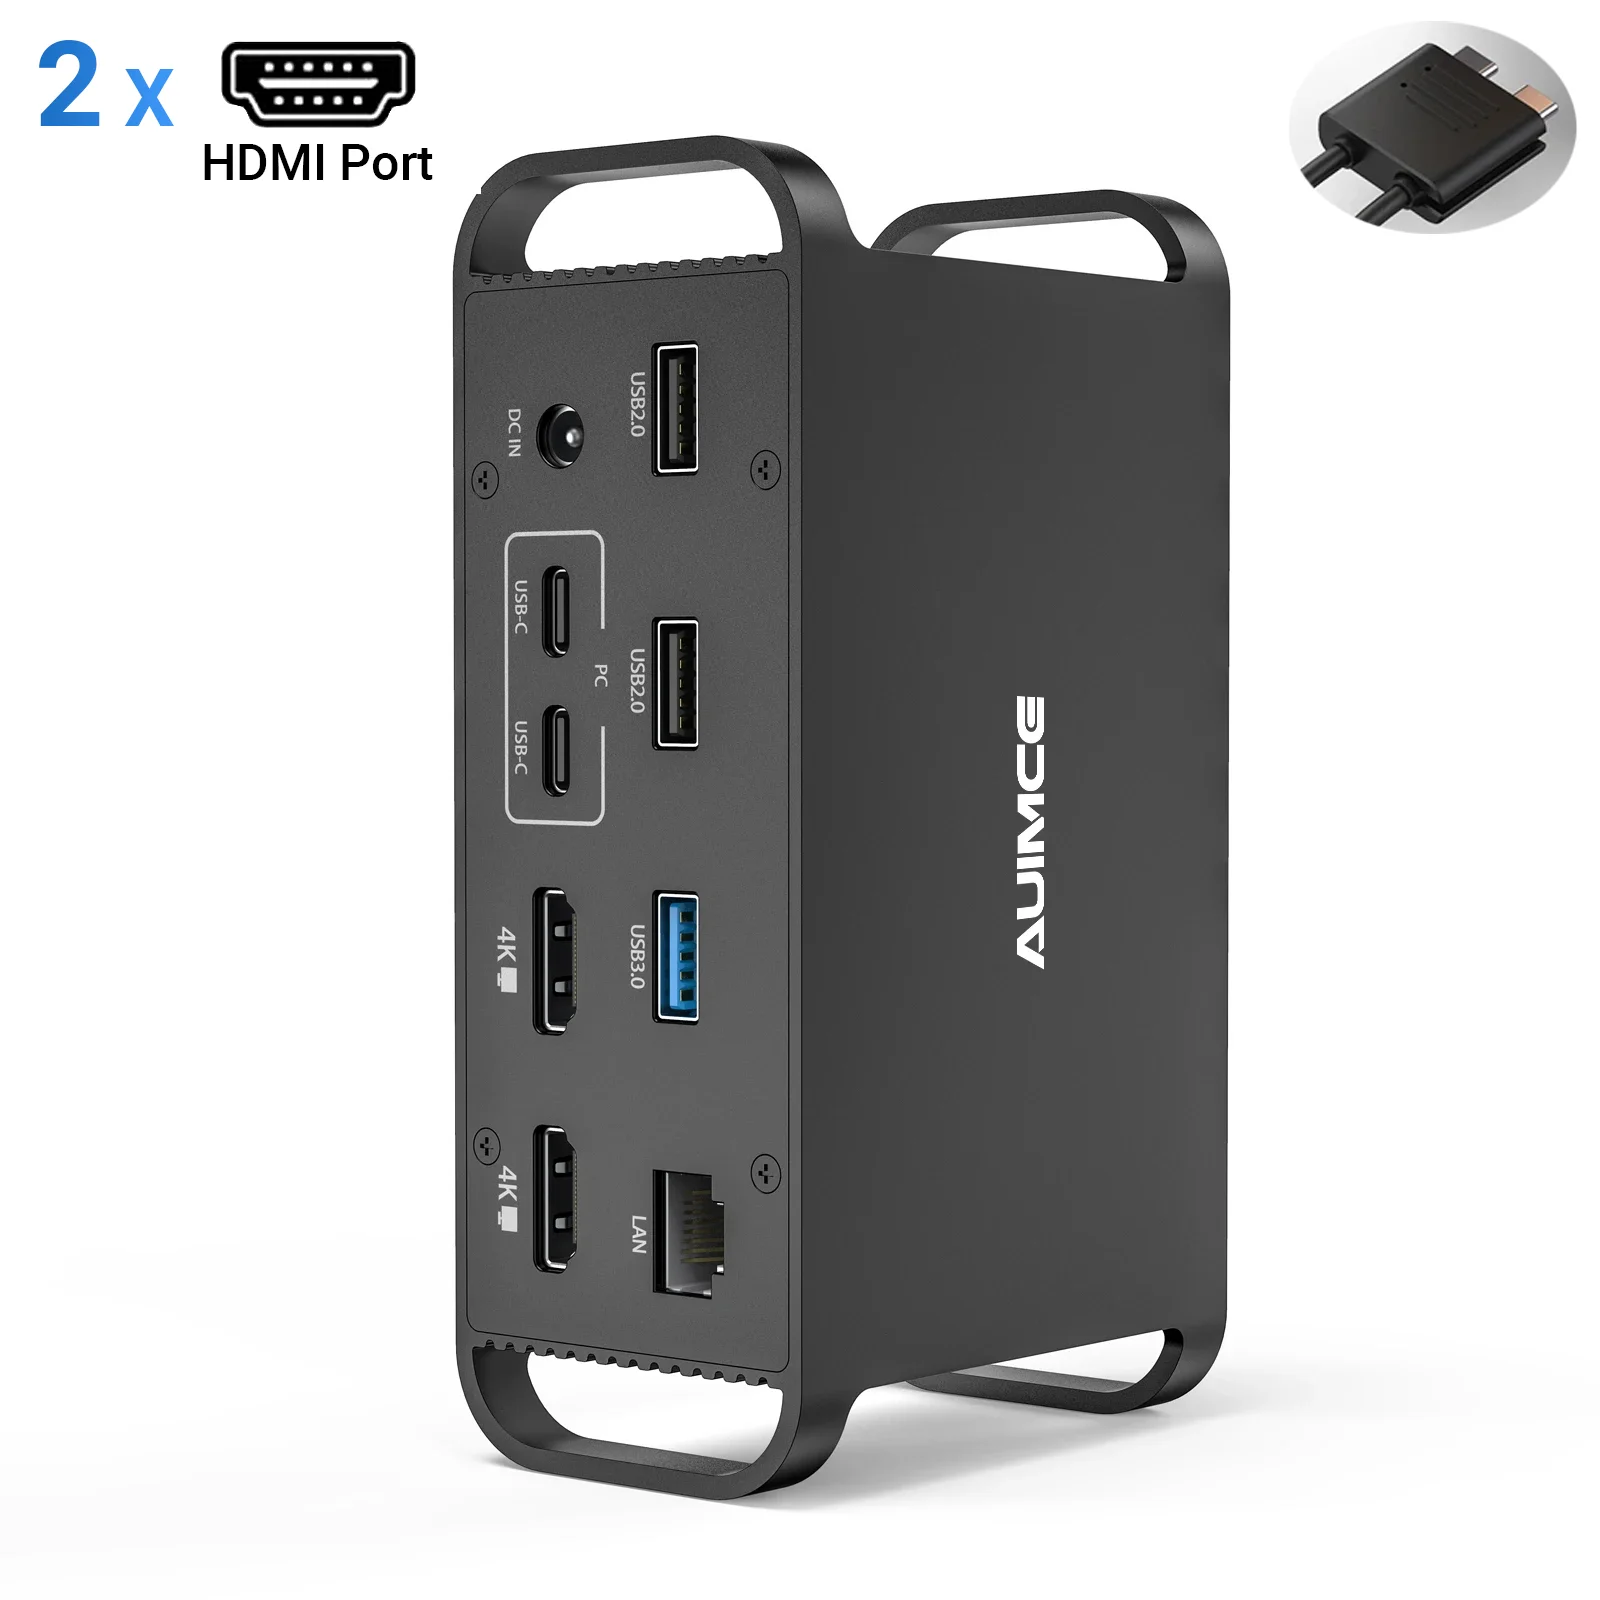 

MacBook Docking Station USB C Dual Monitor 2 HDMI 4K 60Hz USB3.0 PD 18W RJ45 AC Power Adapter SD Card Reader for Macbook Pro Air